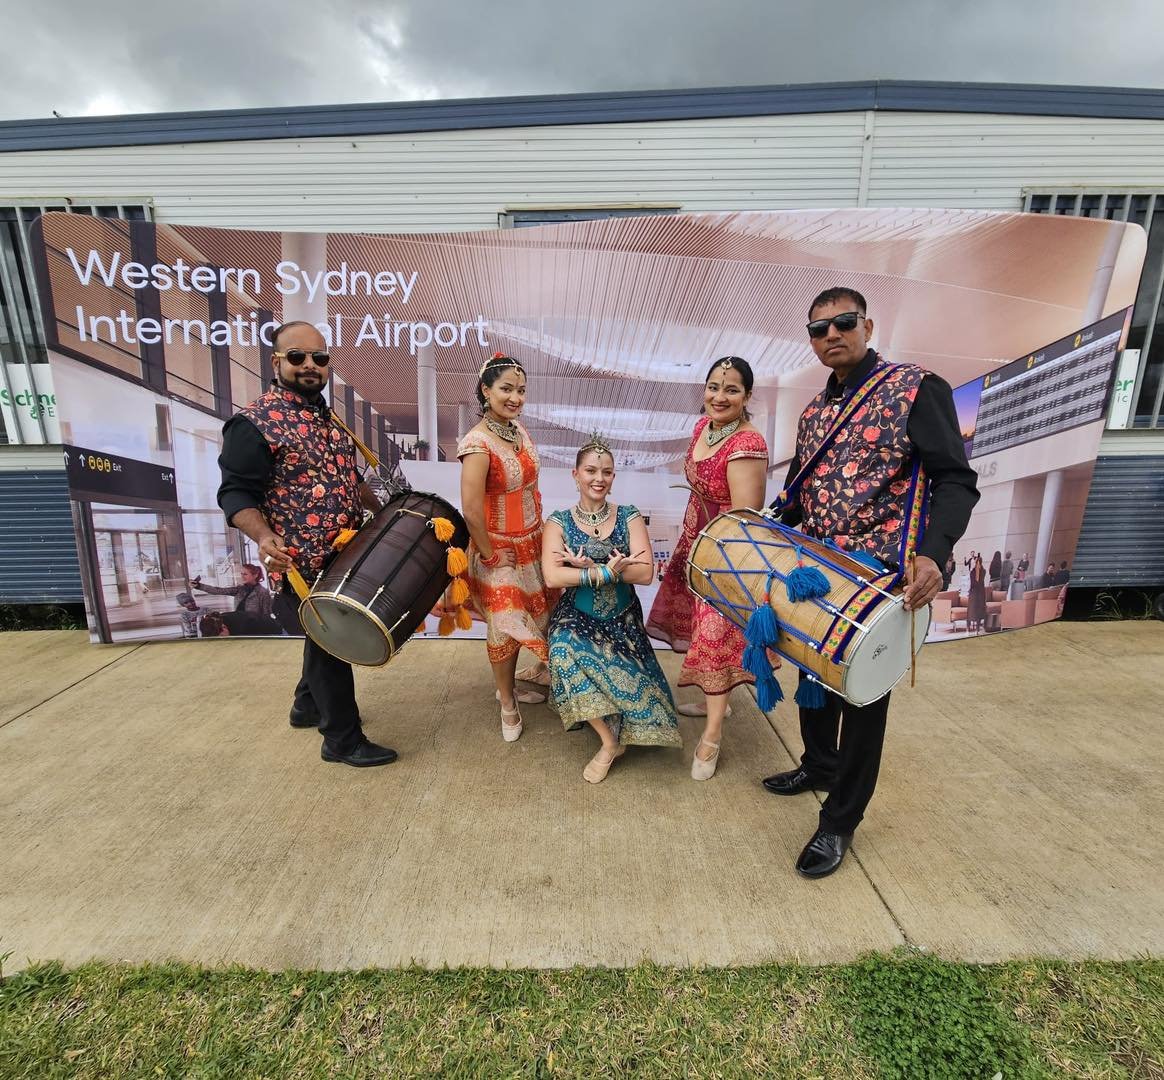 Can&rsquo;t forget to mention the incredible Dhol players who performed with us and the Tahitian dancers we met along the way! 

It&rsquo;s always so much fun when we are met with other creatives who enjoy entertaining as much as we do. 

Very inspir